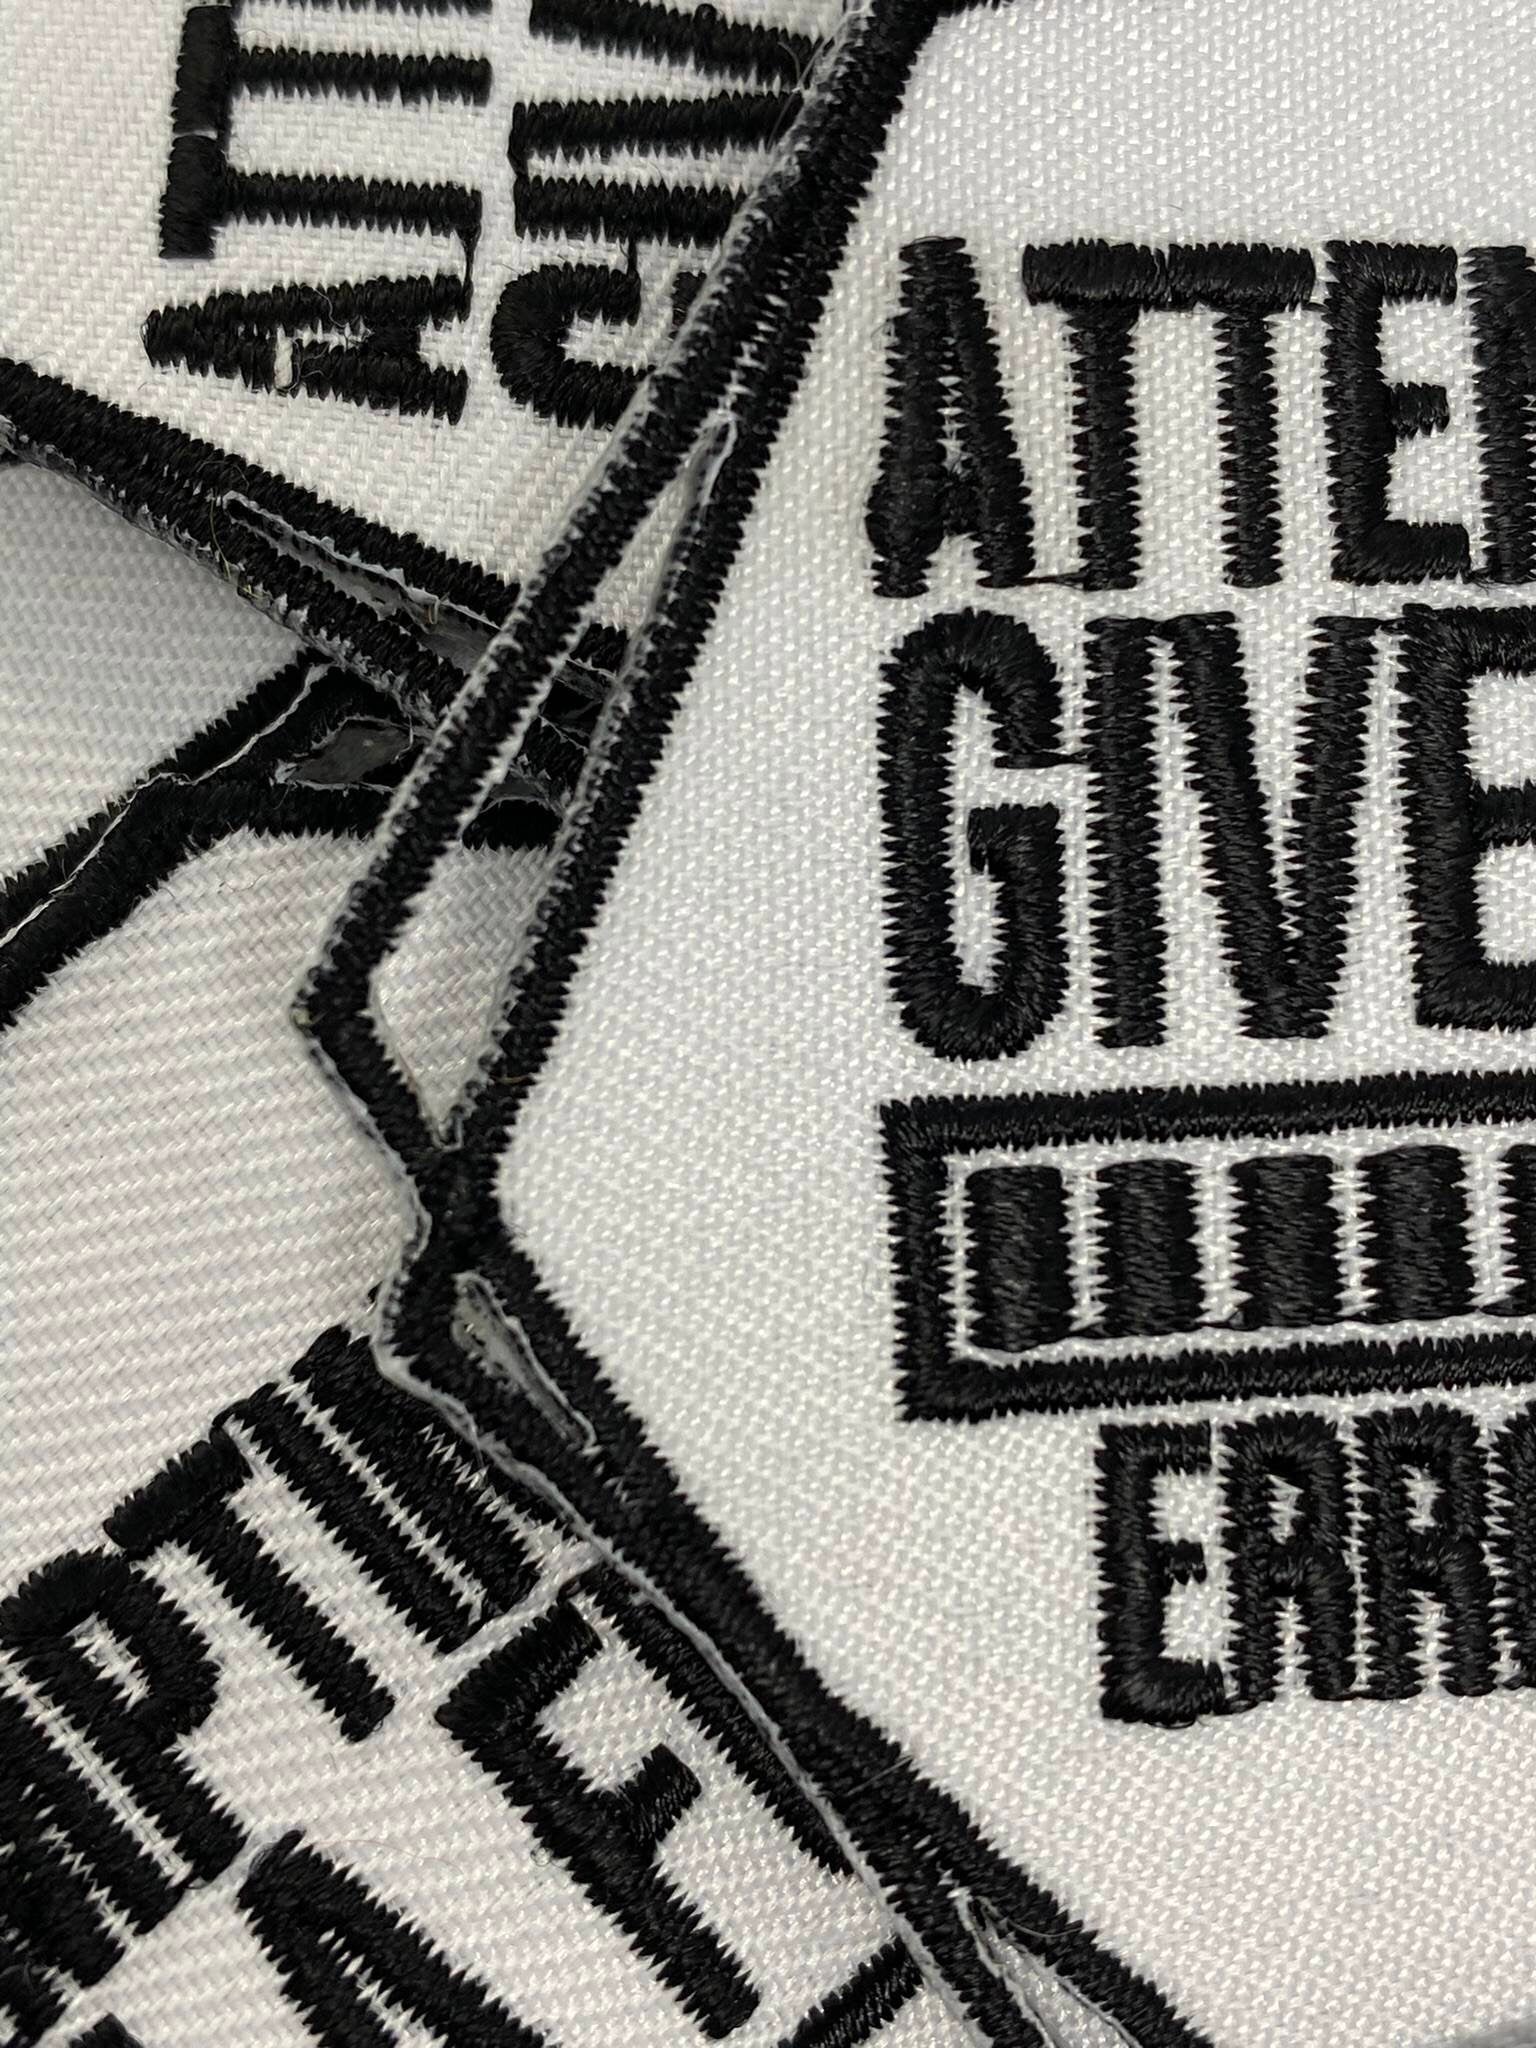 Sarcastic Patch, 1-pc "Attempting to Give AF" Statement Patch, Size 3.5", Applique for Clothing, Iron-On Embroidered Patch, Funny Gifts